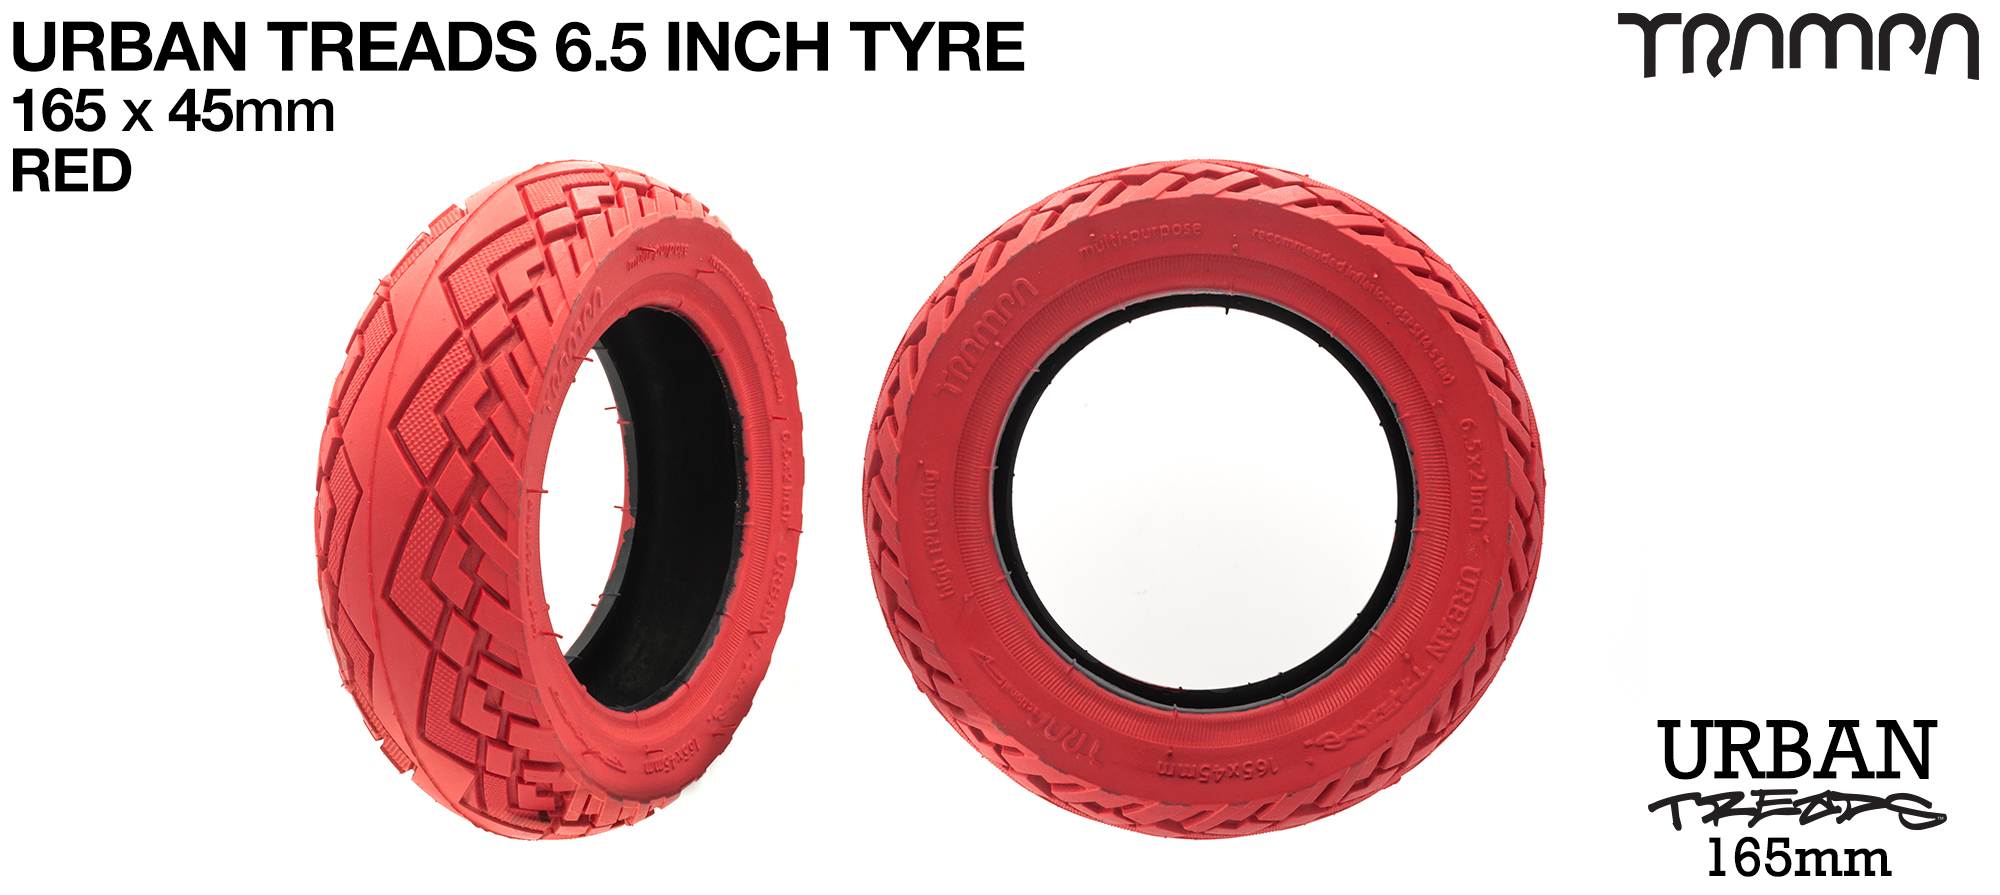 6 Inch Tyre TRAMPA URBAN TREADS is the perfect all round tyre for Urban & City riding - RED 